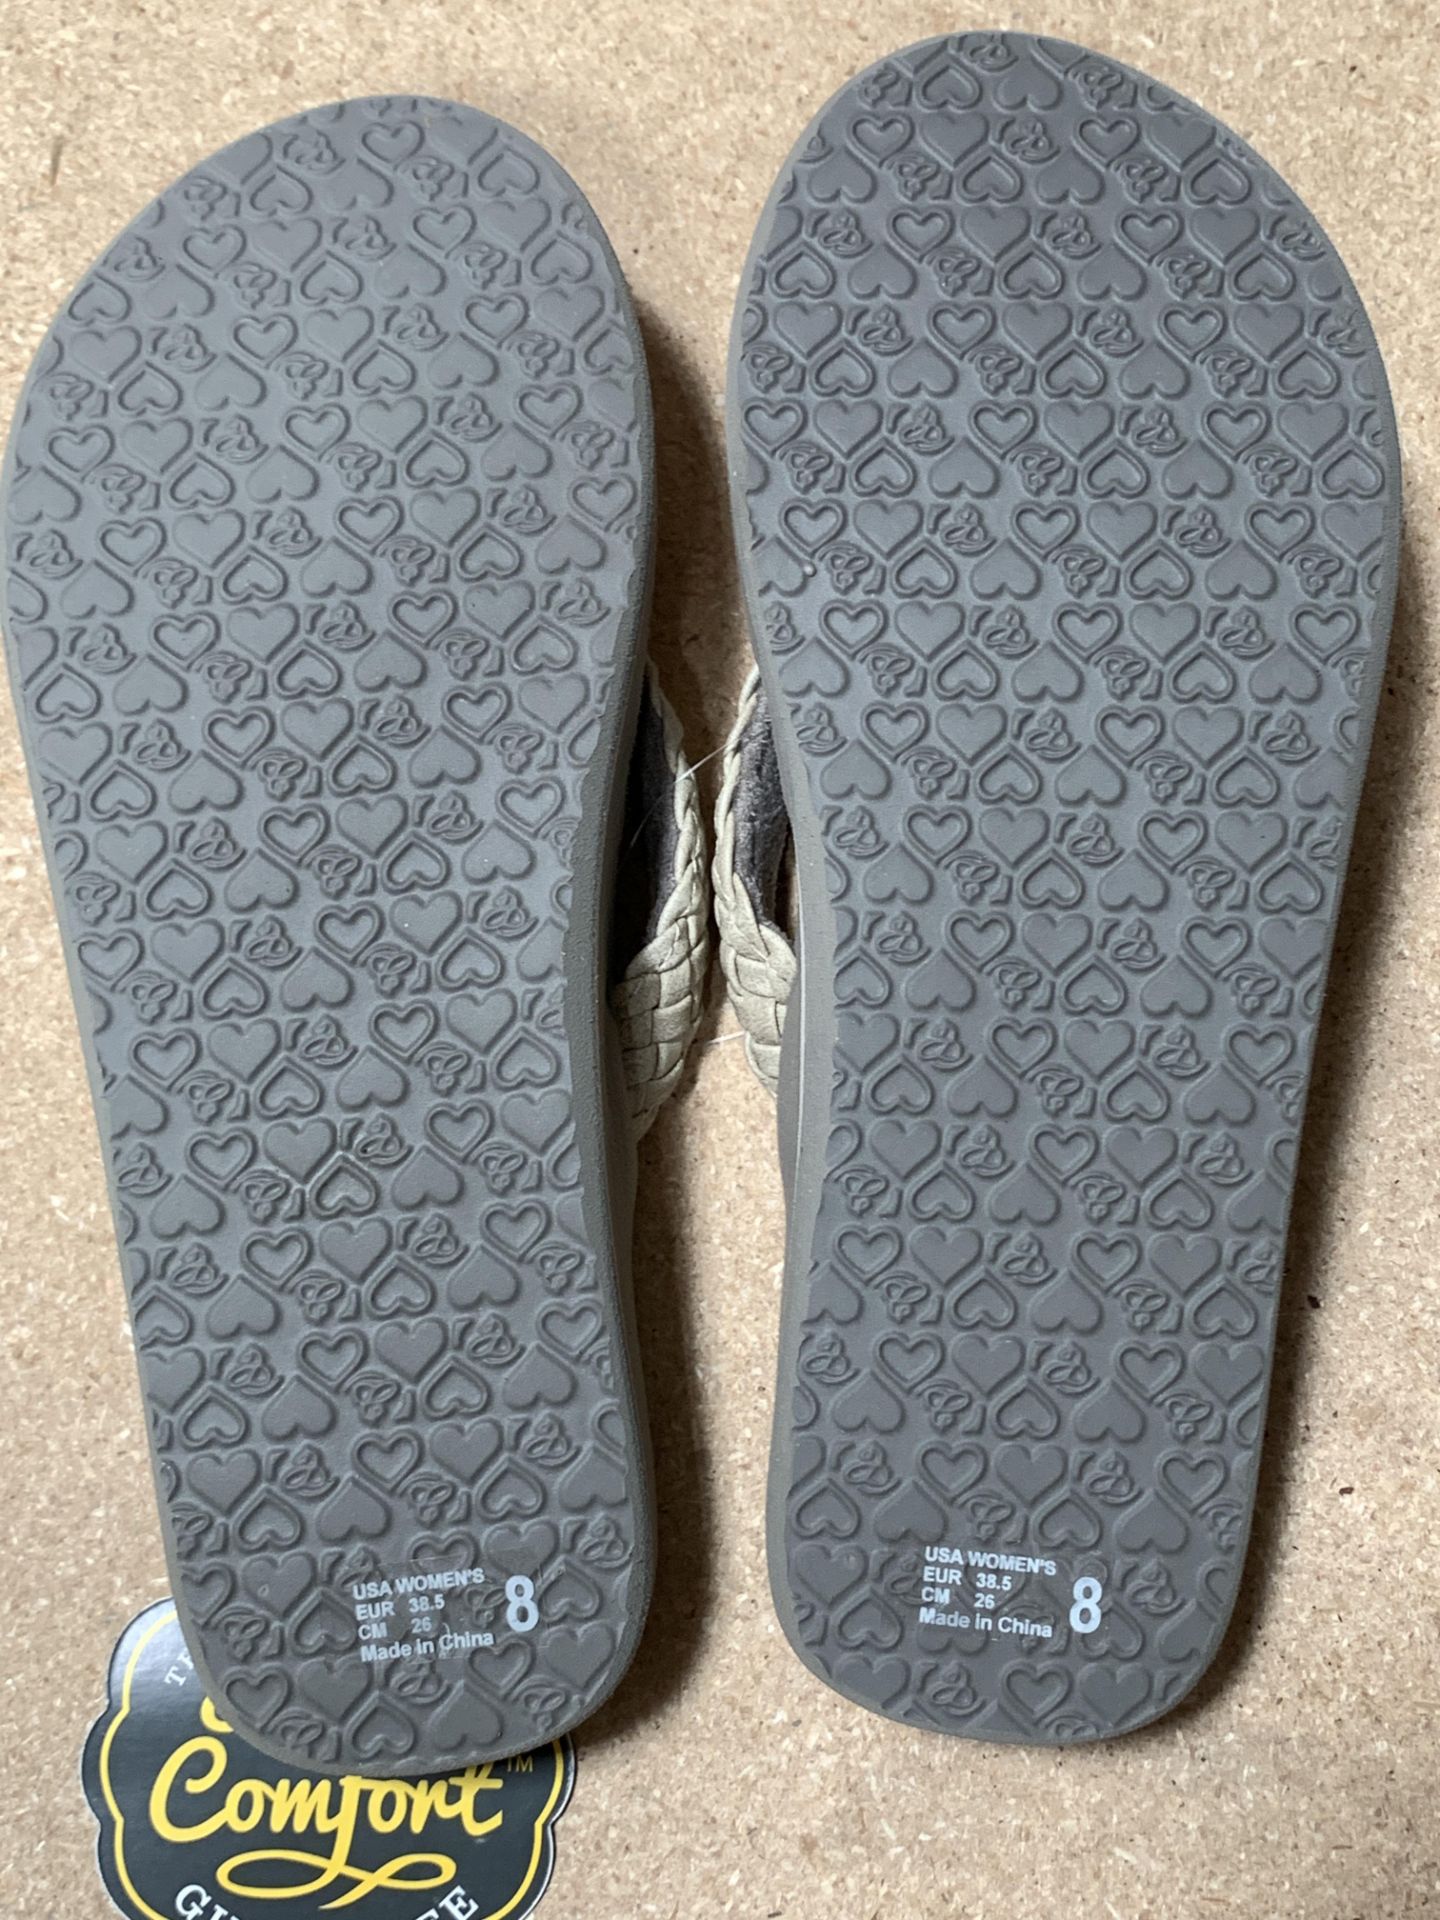 12 Pairs Cobian Flip Flop Sandals, Braided Bounce, New w. Tags, Various Sizes (Retail $468) - Image 6 of 6